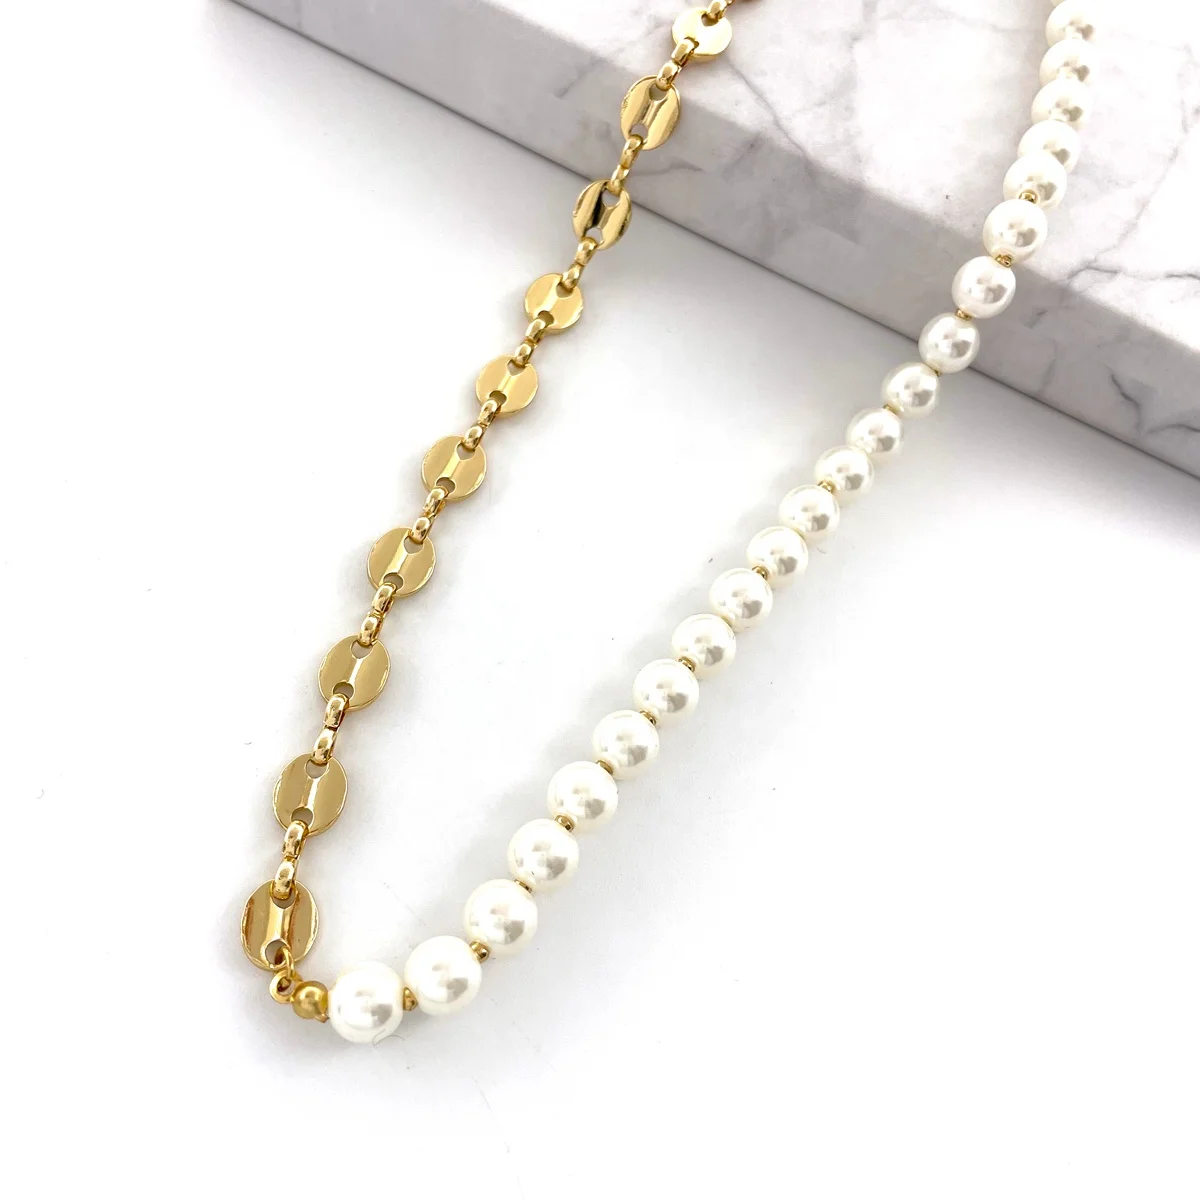 Fashion charm jewelry pig nose chain gold plated pearl necklace for women